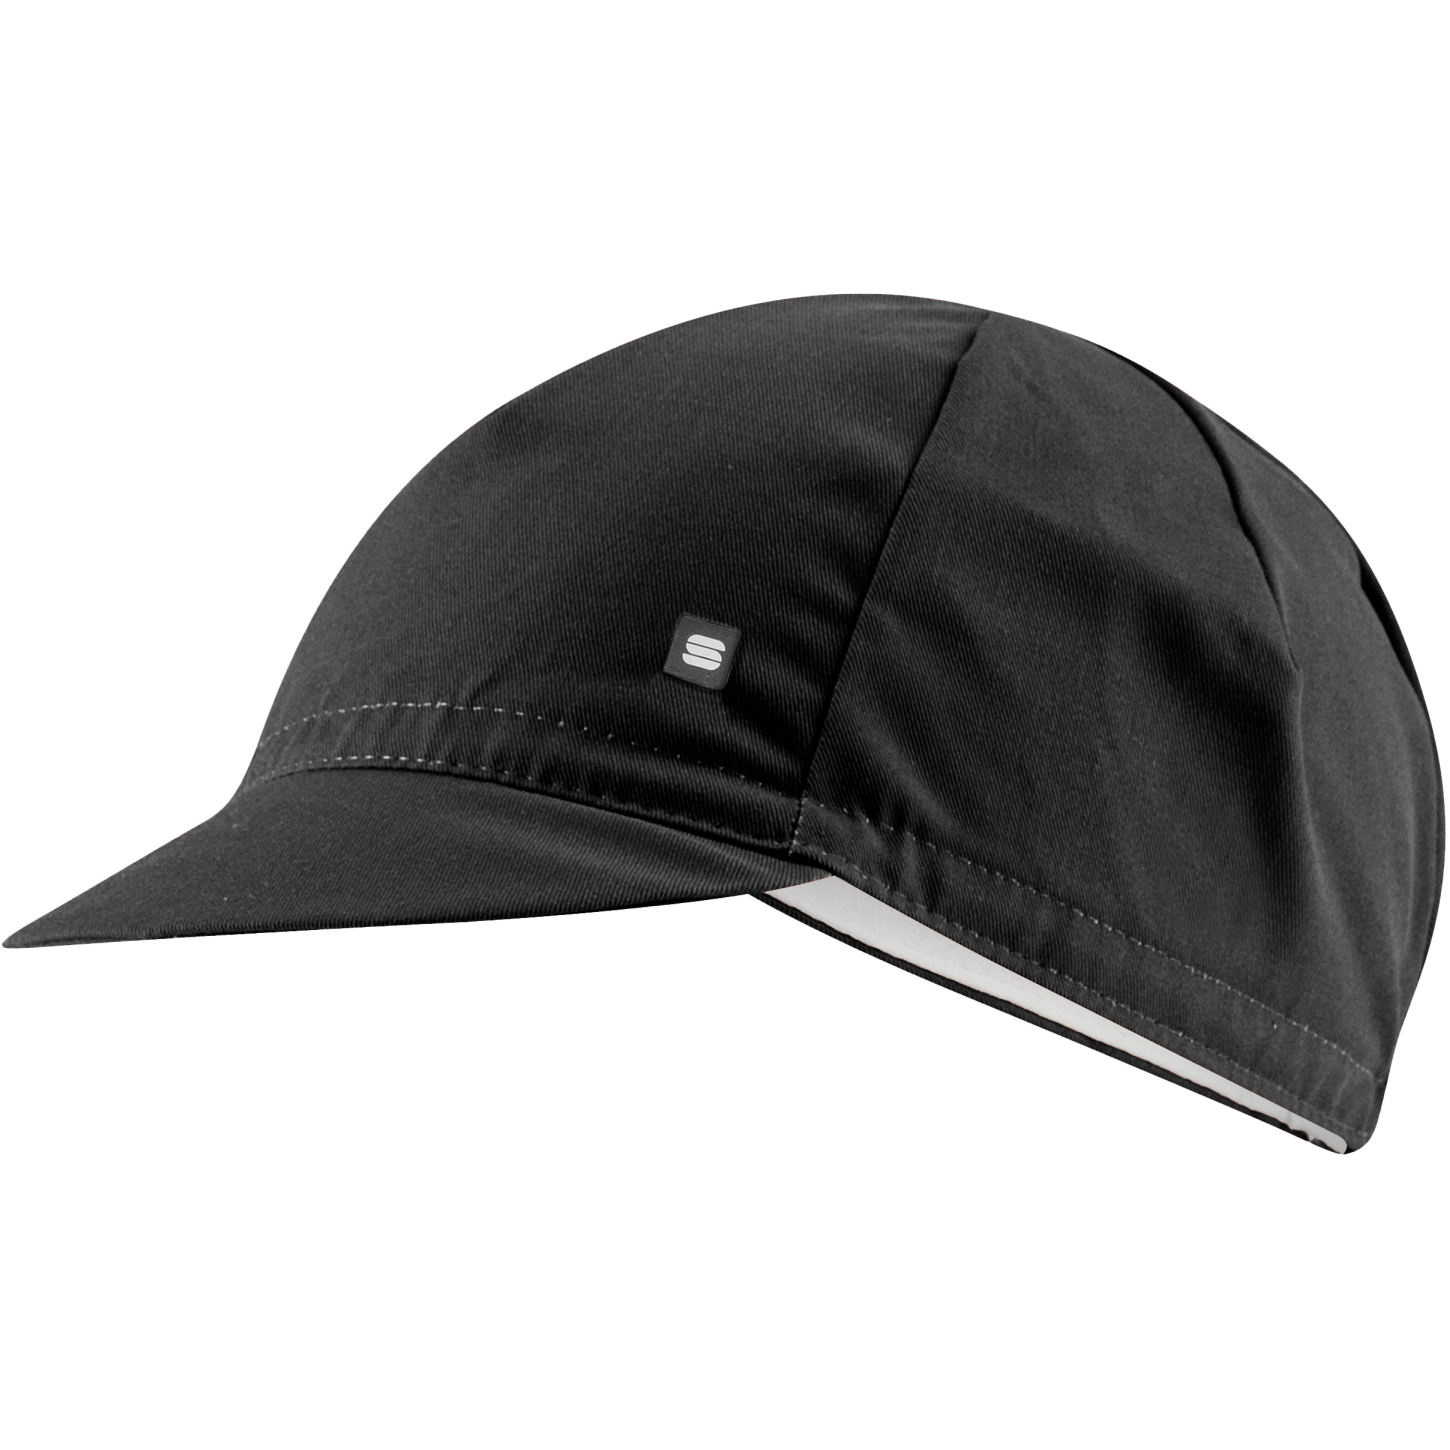 Picture of Sportful Srk Cycling Cap - 002 Black